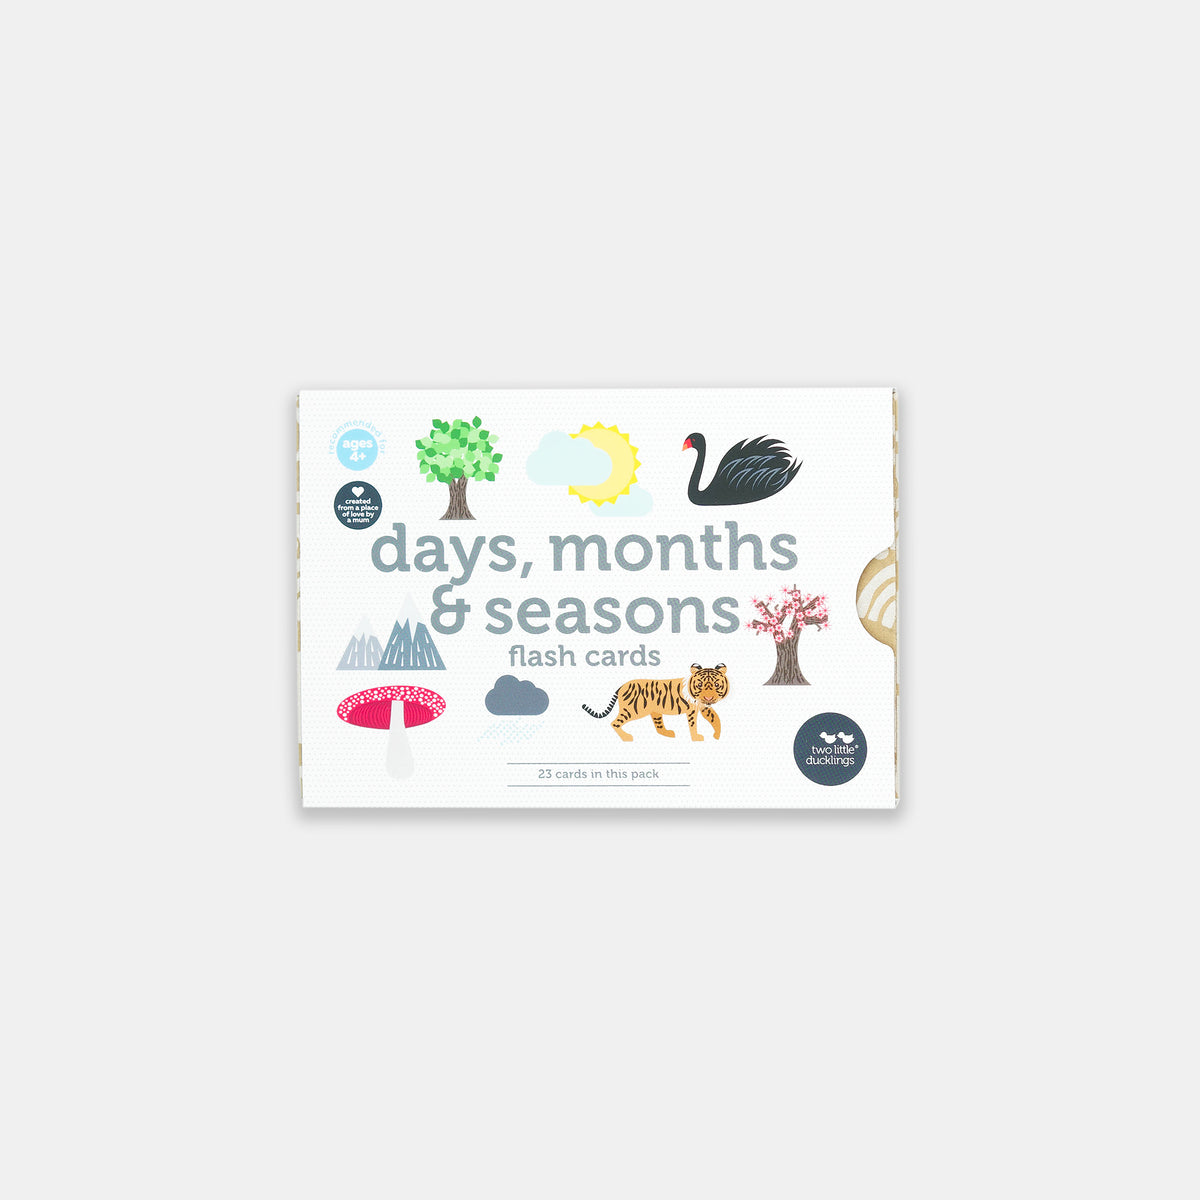 two little ducklings flash cards - days, months & seasons